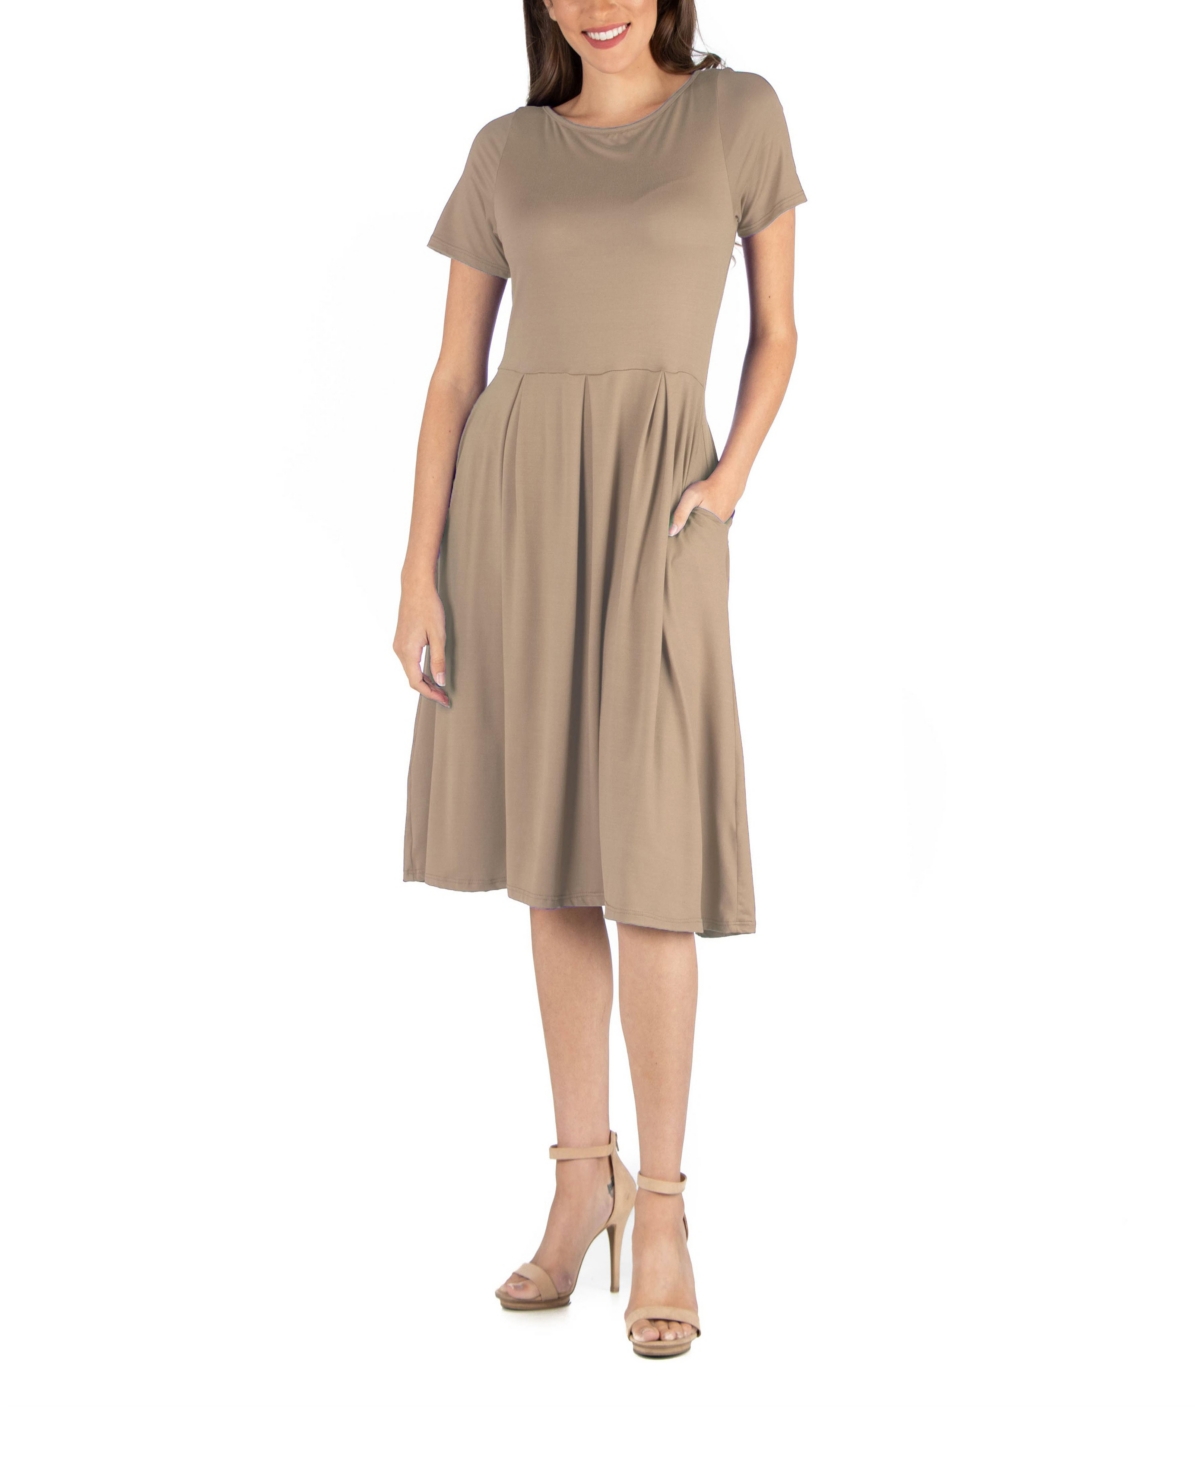 Midi Dress with Short Sleeves and Pocket Detail - Taupe